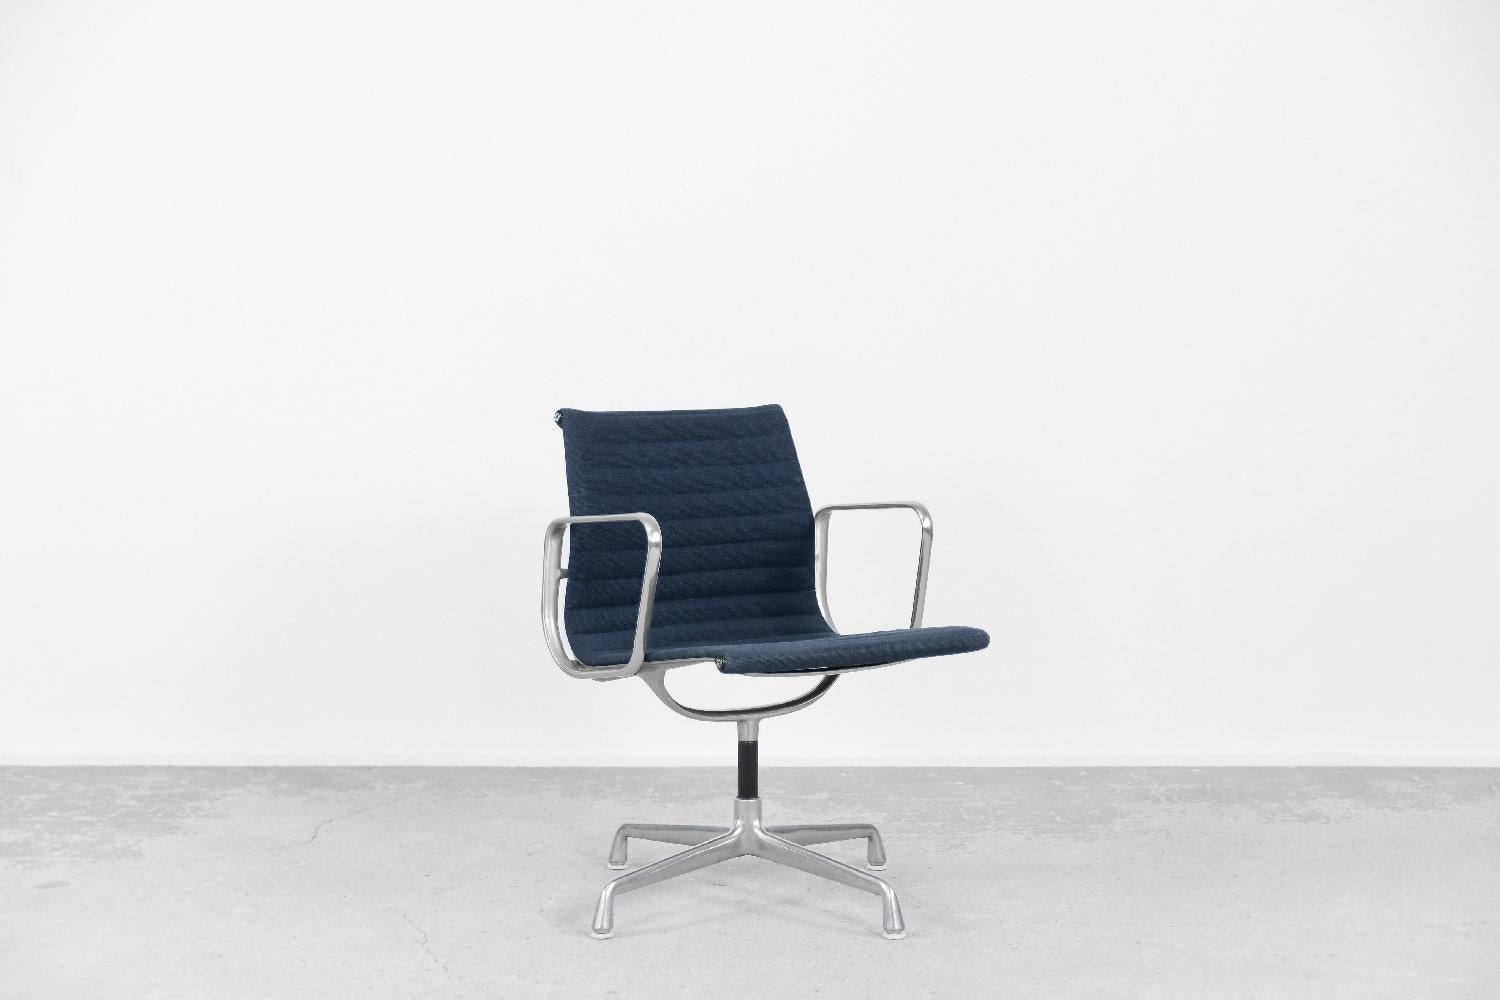 This EA 108 chair was designed by Charles & Ray Eames in 1958 and produced by US maker Herman Miller. This chair can rotate and is marked with Herman Miller sign, number 938-138. Fully original piece. The upholstery is made of ribbed blue hopsack